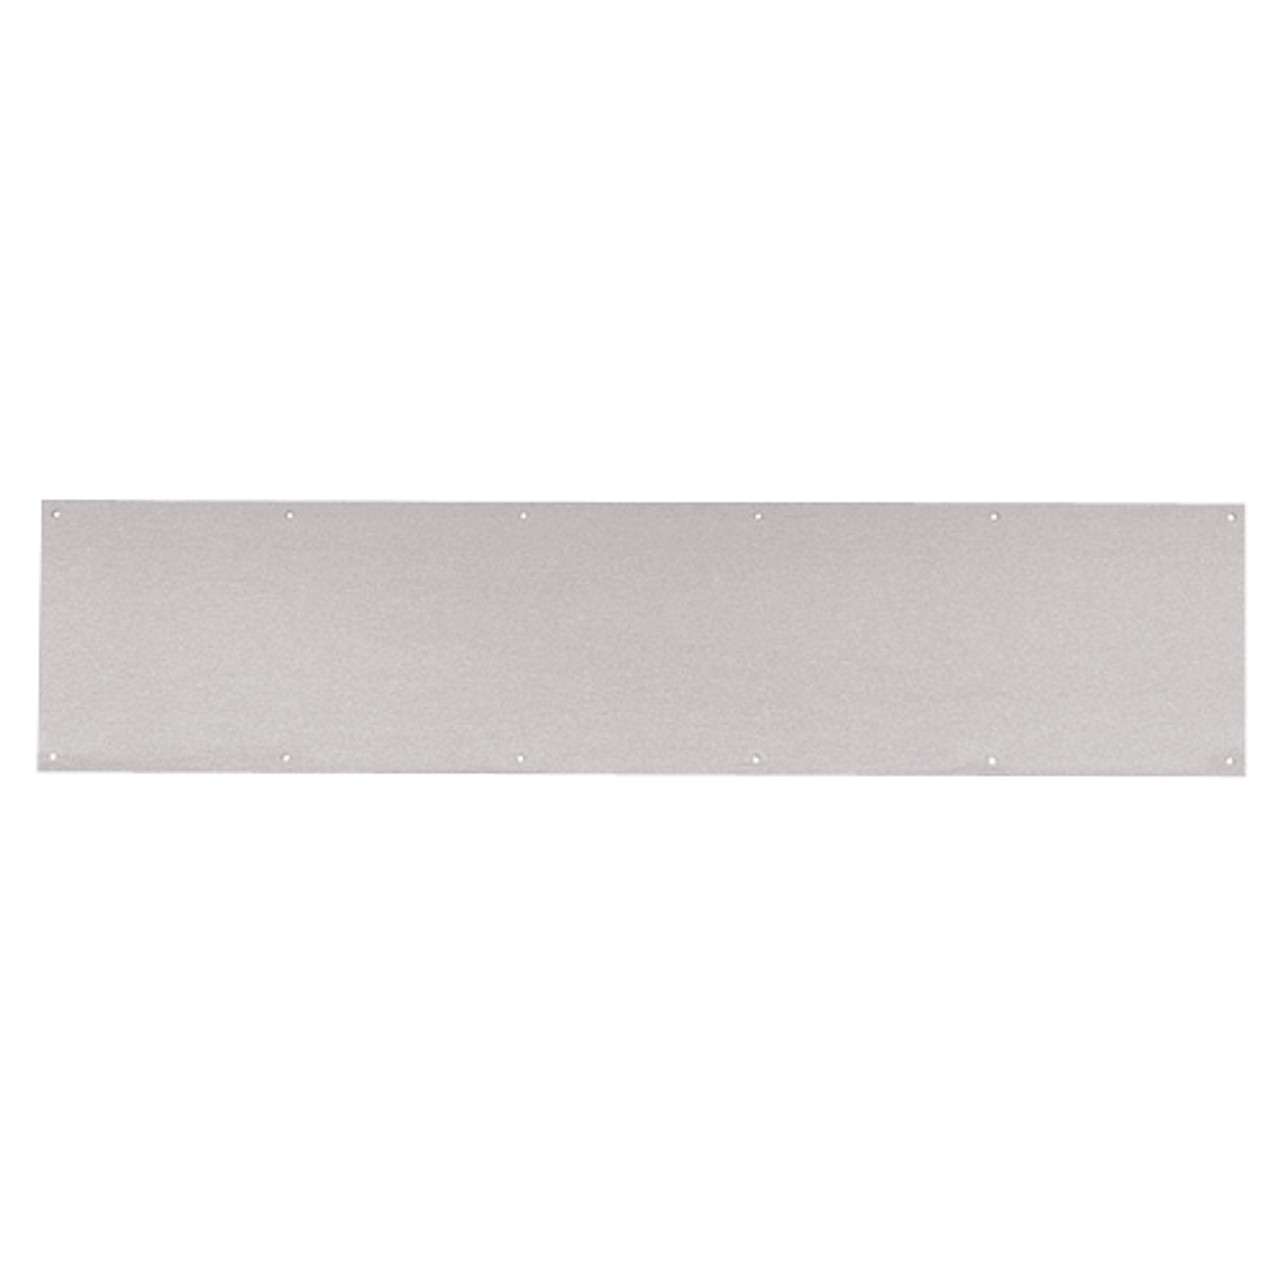 8400-US32D-33x36-B-CS Ives 8400 Series Protection Plate in Satin Stainless Steel